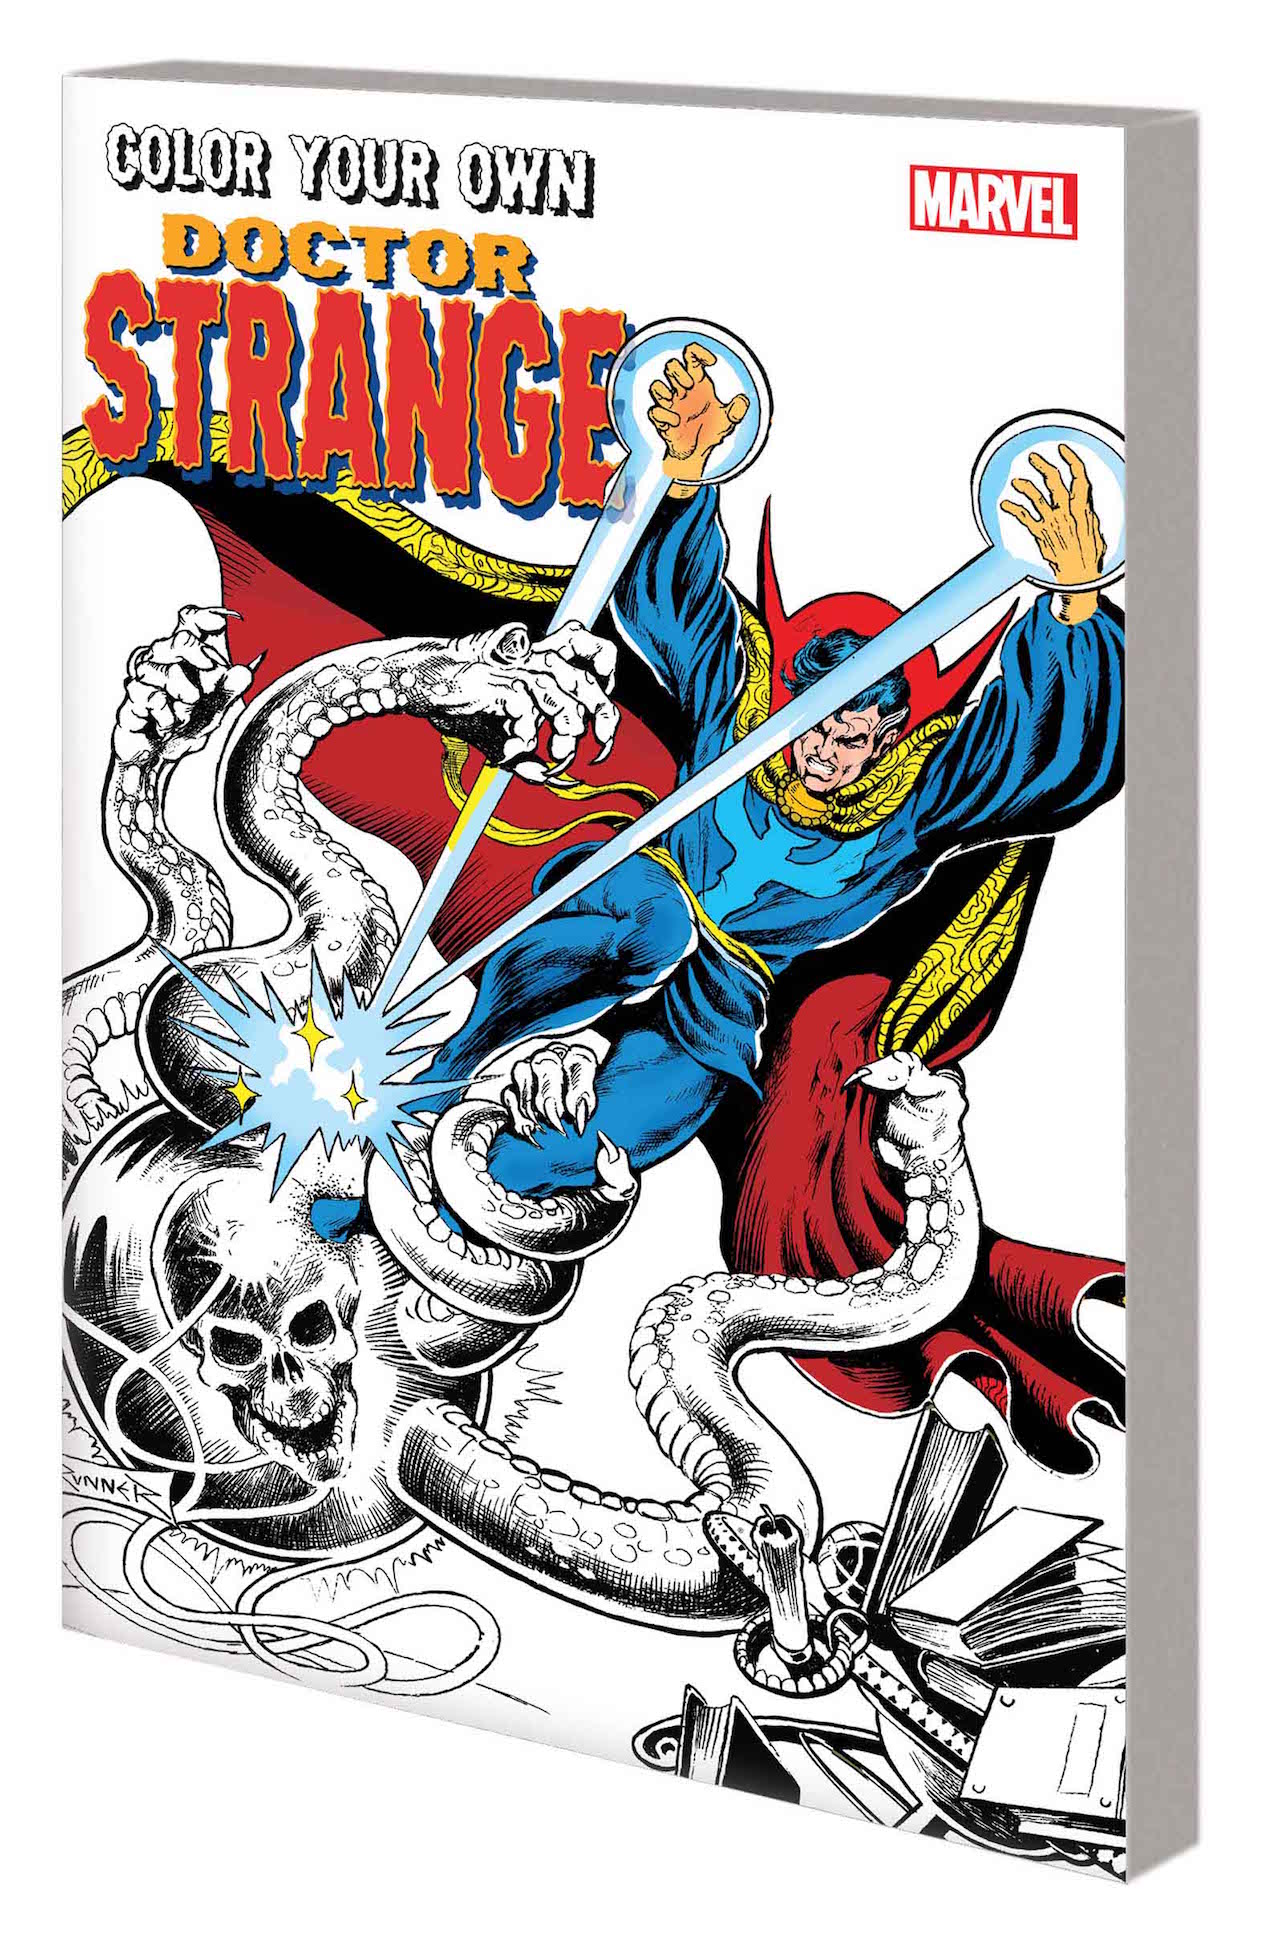 COLOR YOUR OWN DOCTOR STRANGE